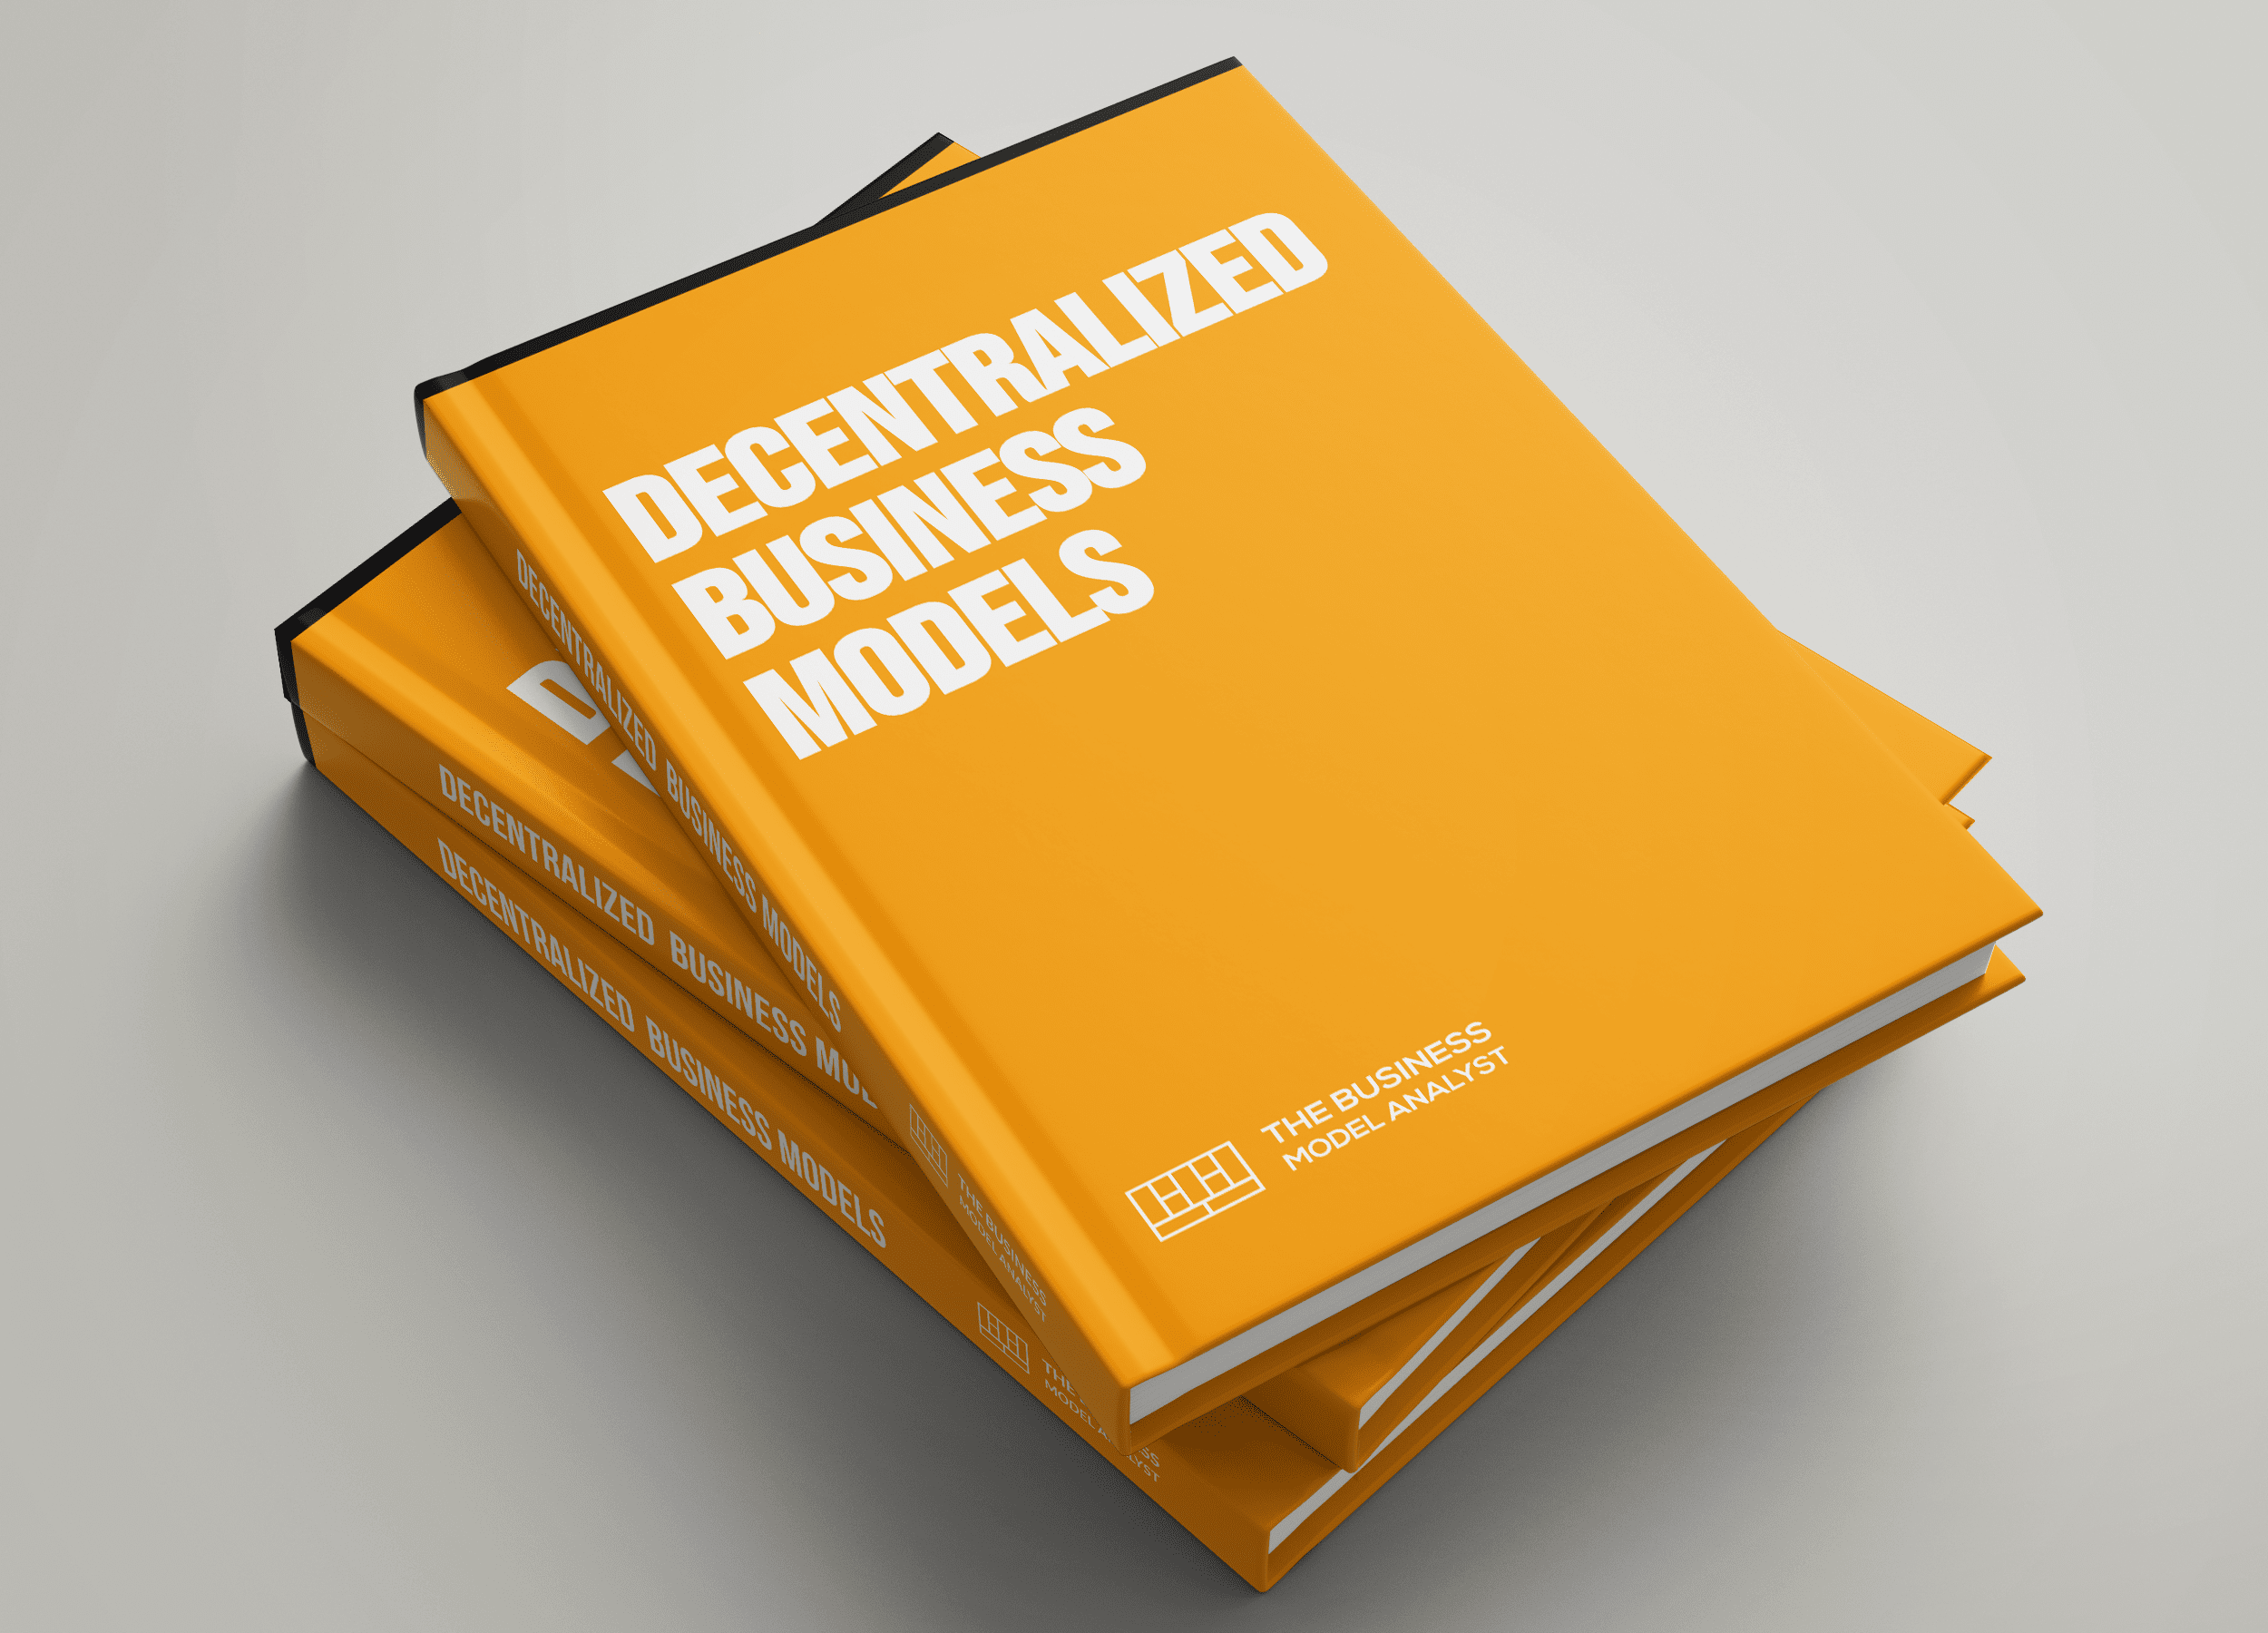 Decentralized Business Models Covers